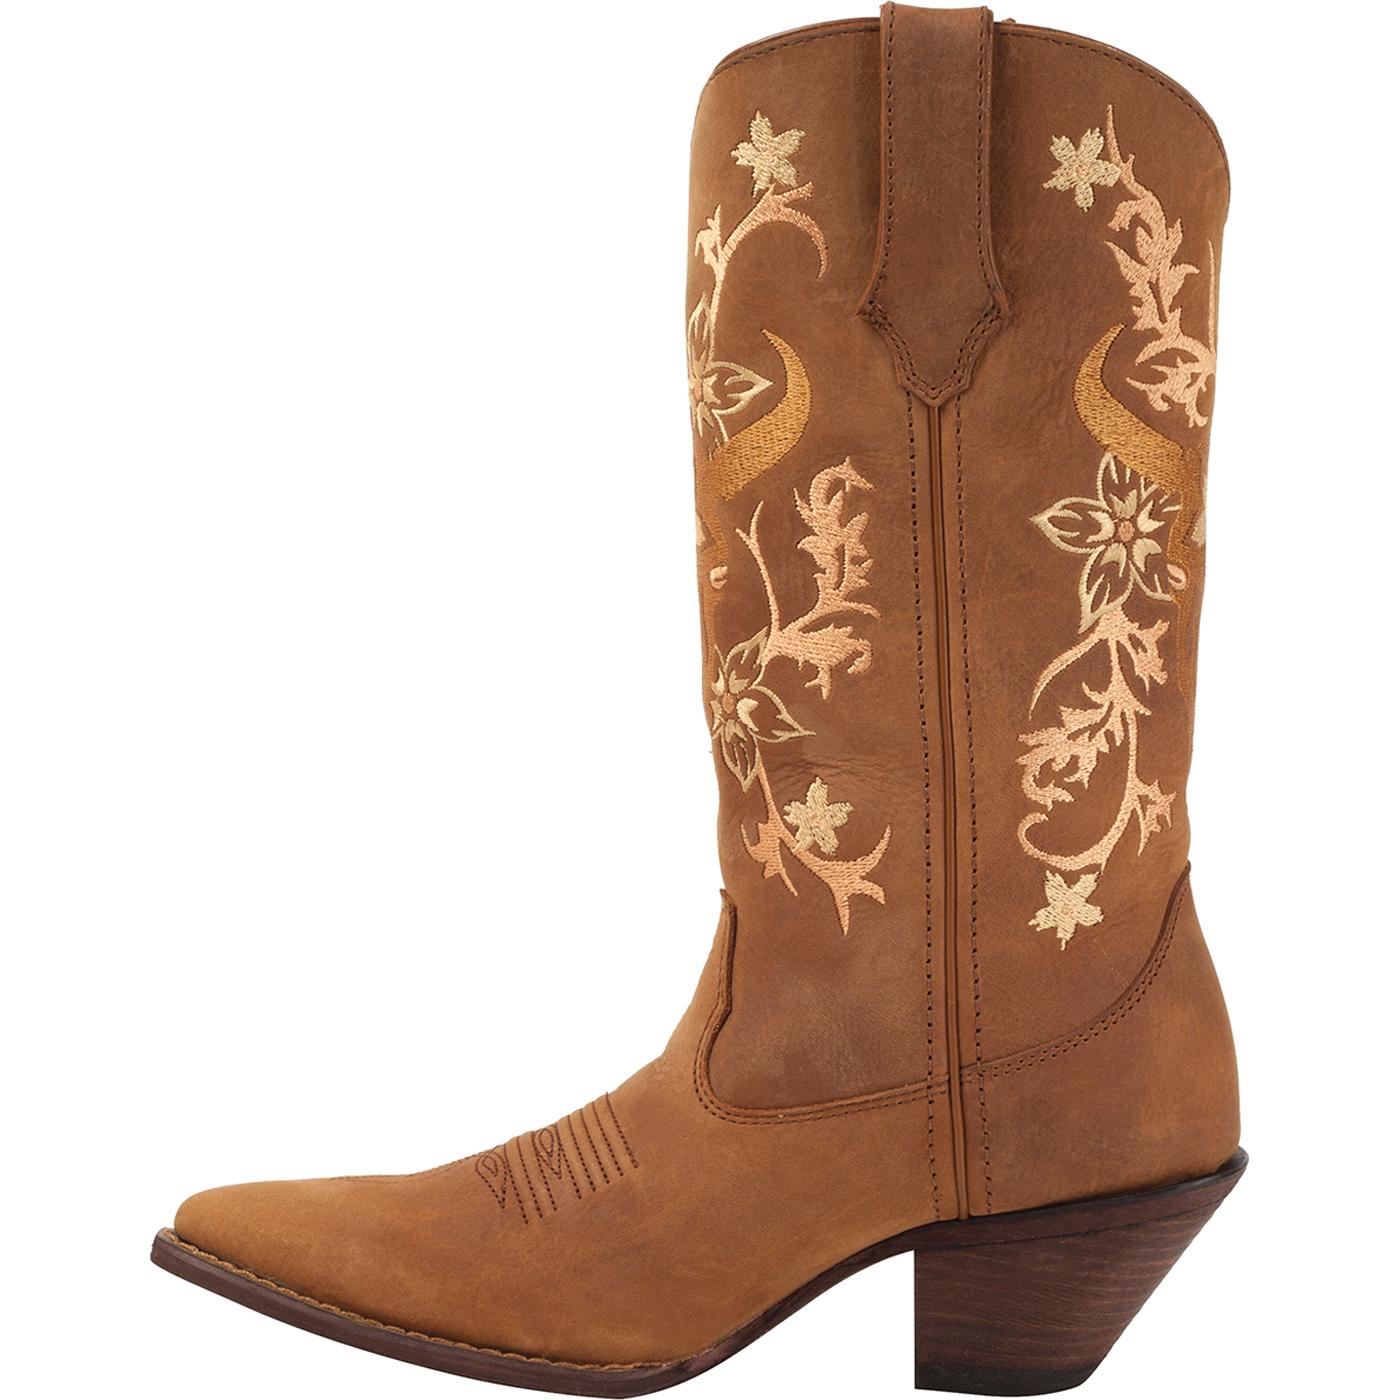 Crush by Durango Distressed Western Boot, #RD009